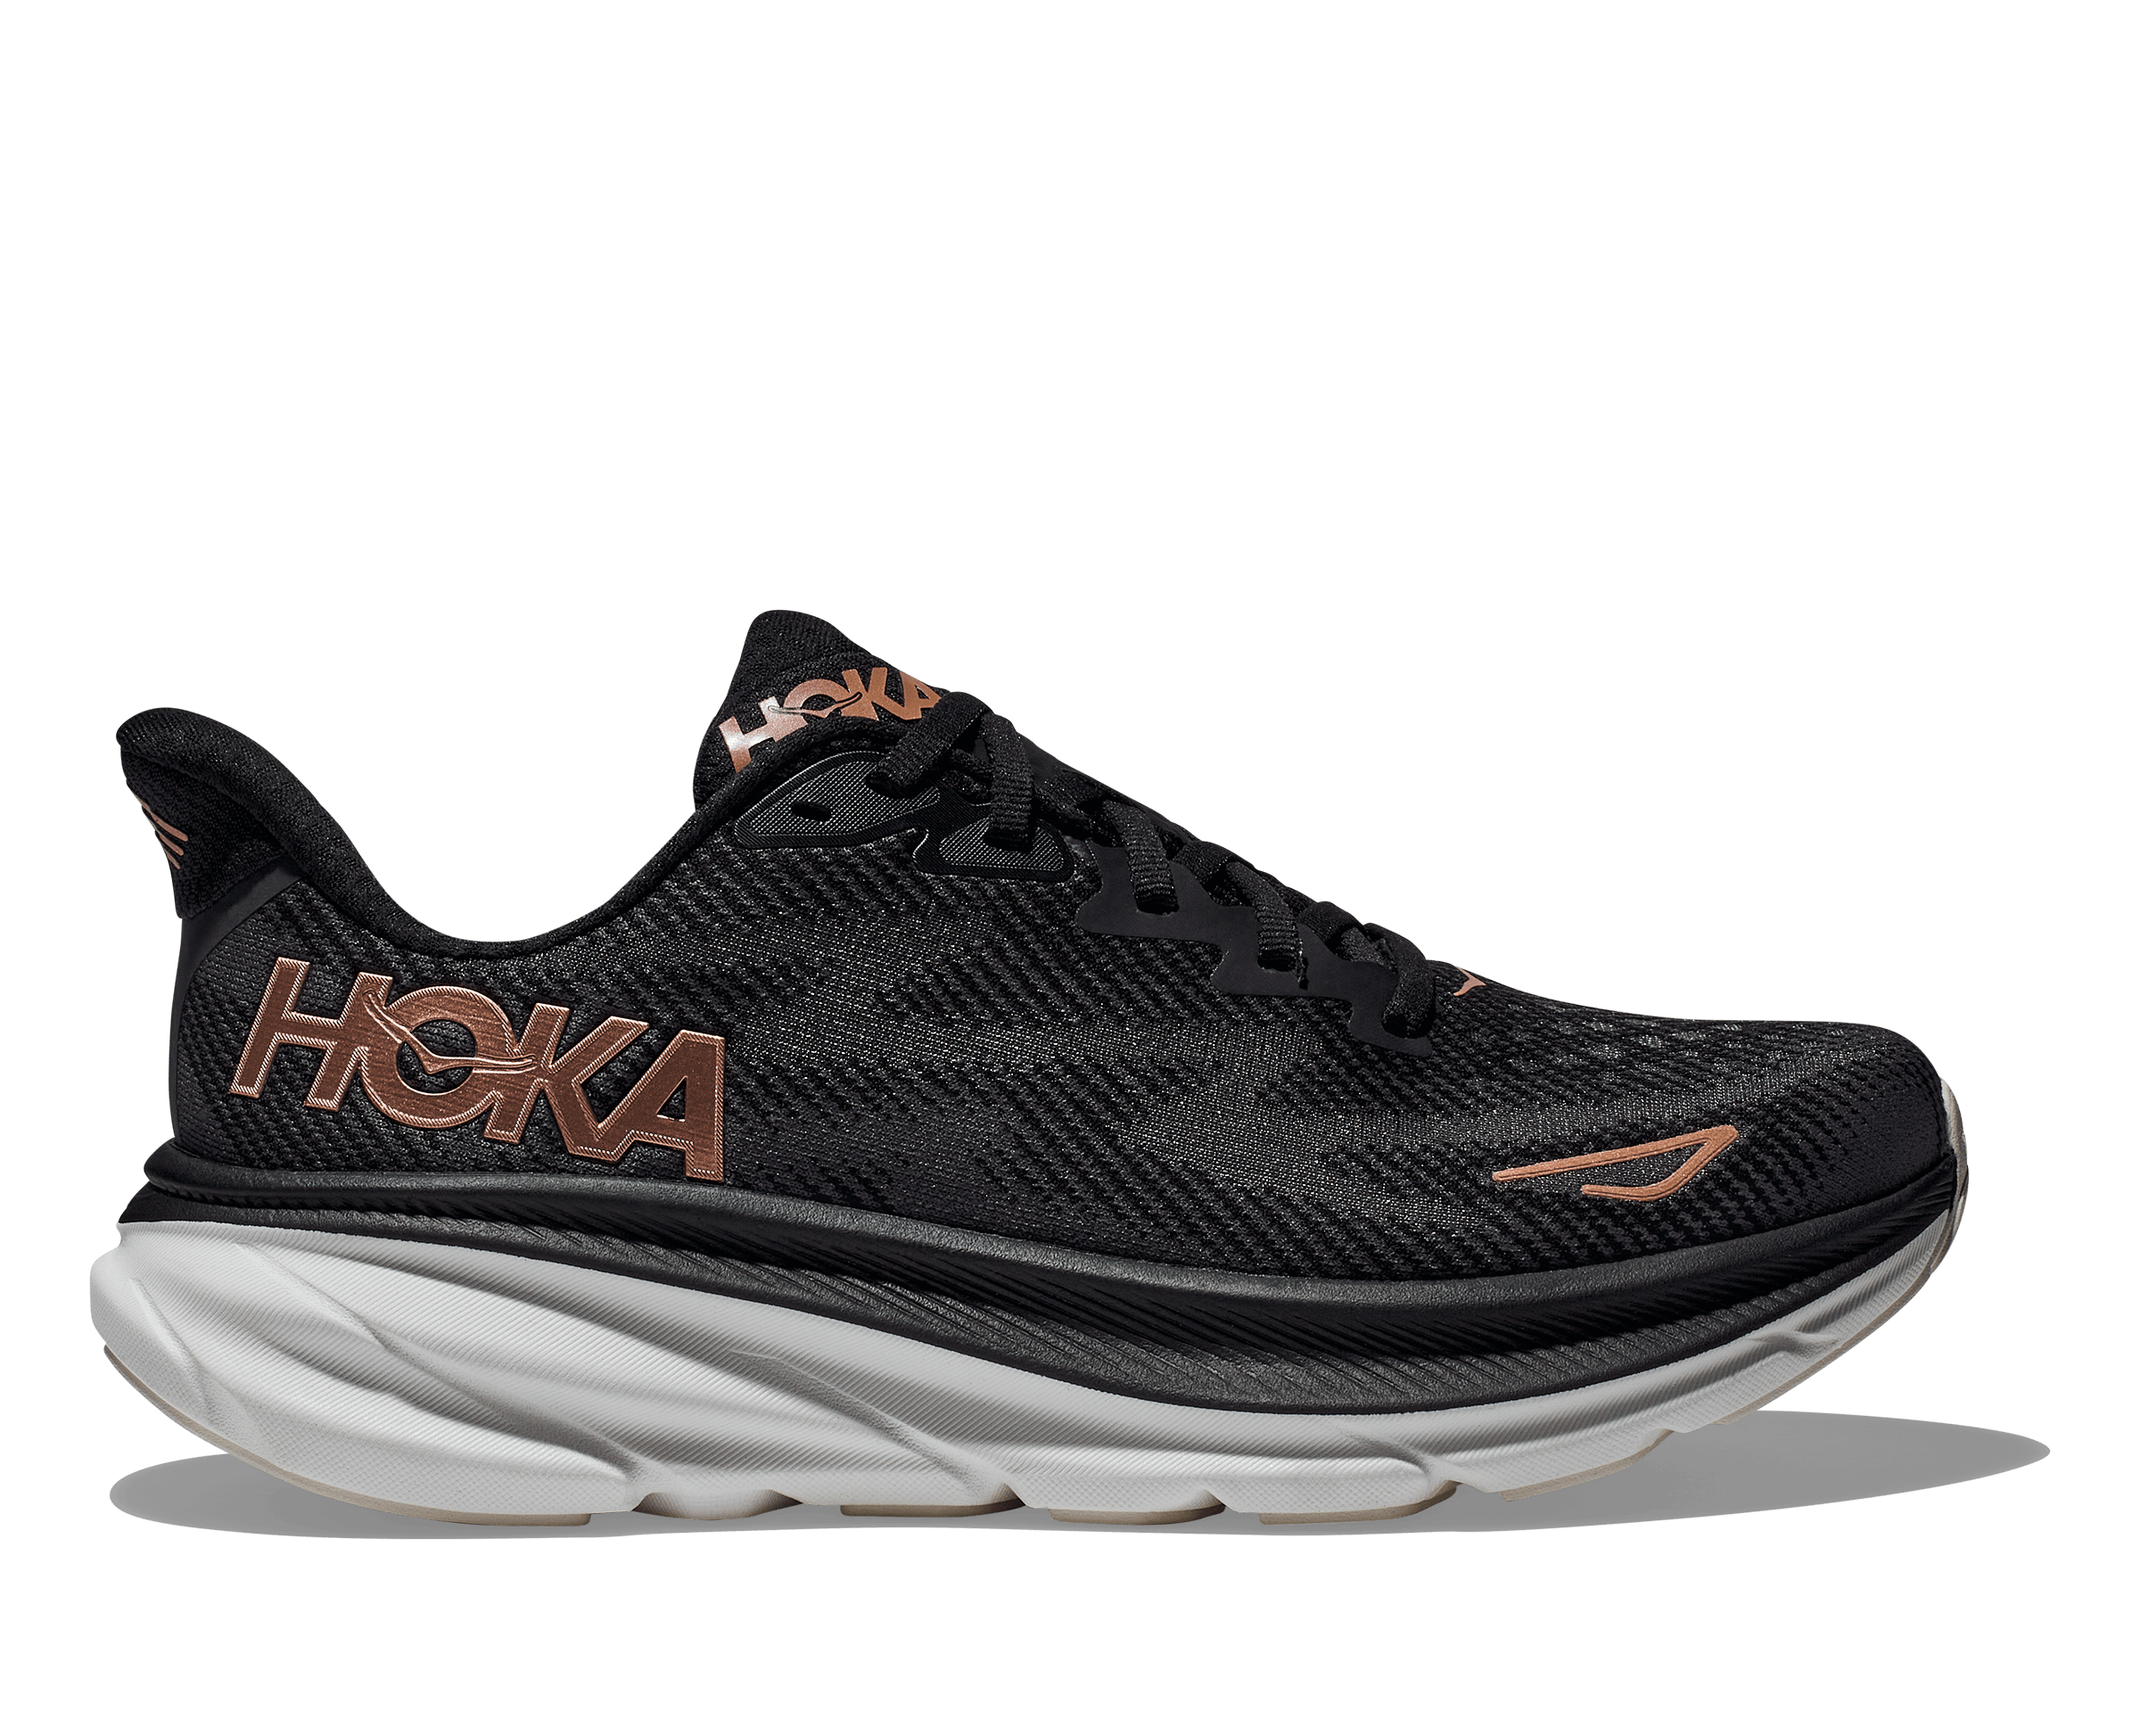 Lateral view of the Women's Clifton 9 by HOKA in the color Black/Rose Gold